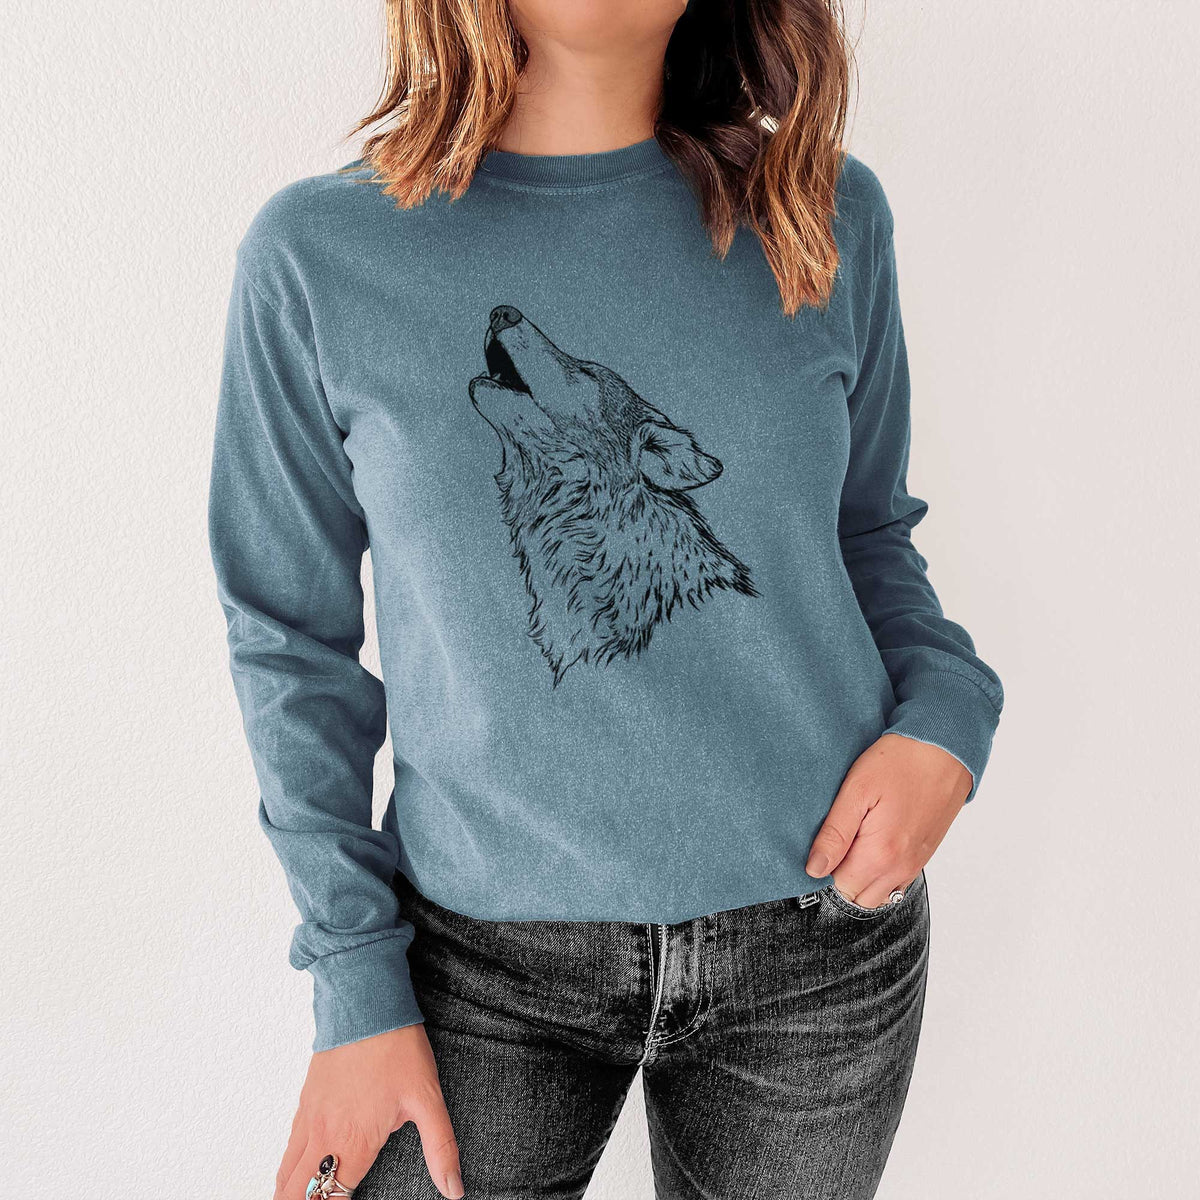 Canis lupus - Grey Wolf Howling - Heavyweight 100% Cotton Long Sleeve